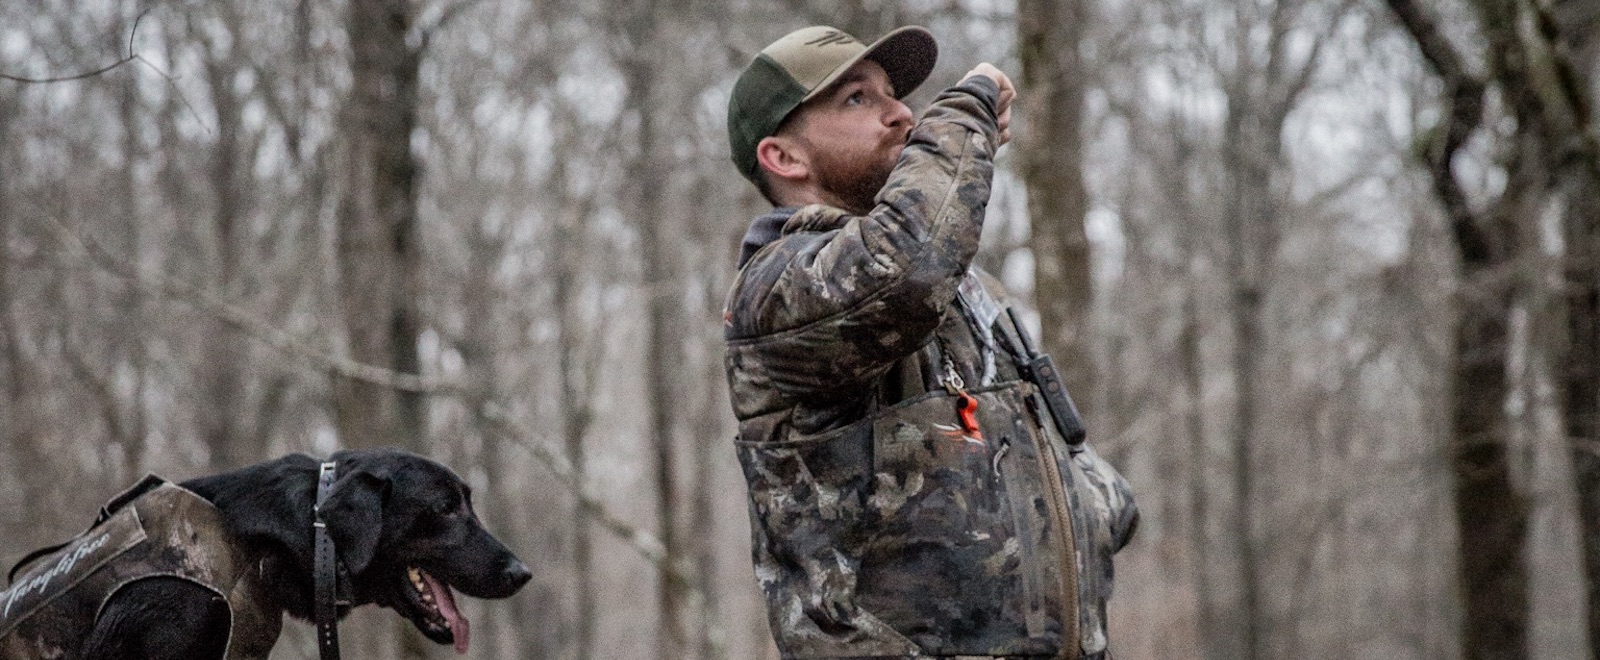 A duck hunter calls ducks while hunting with his black labrador